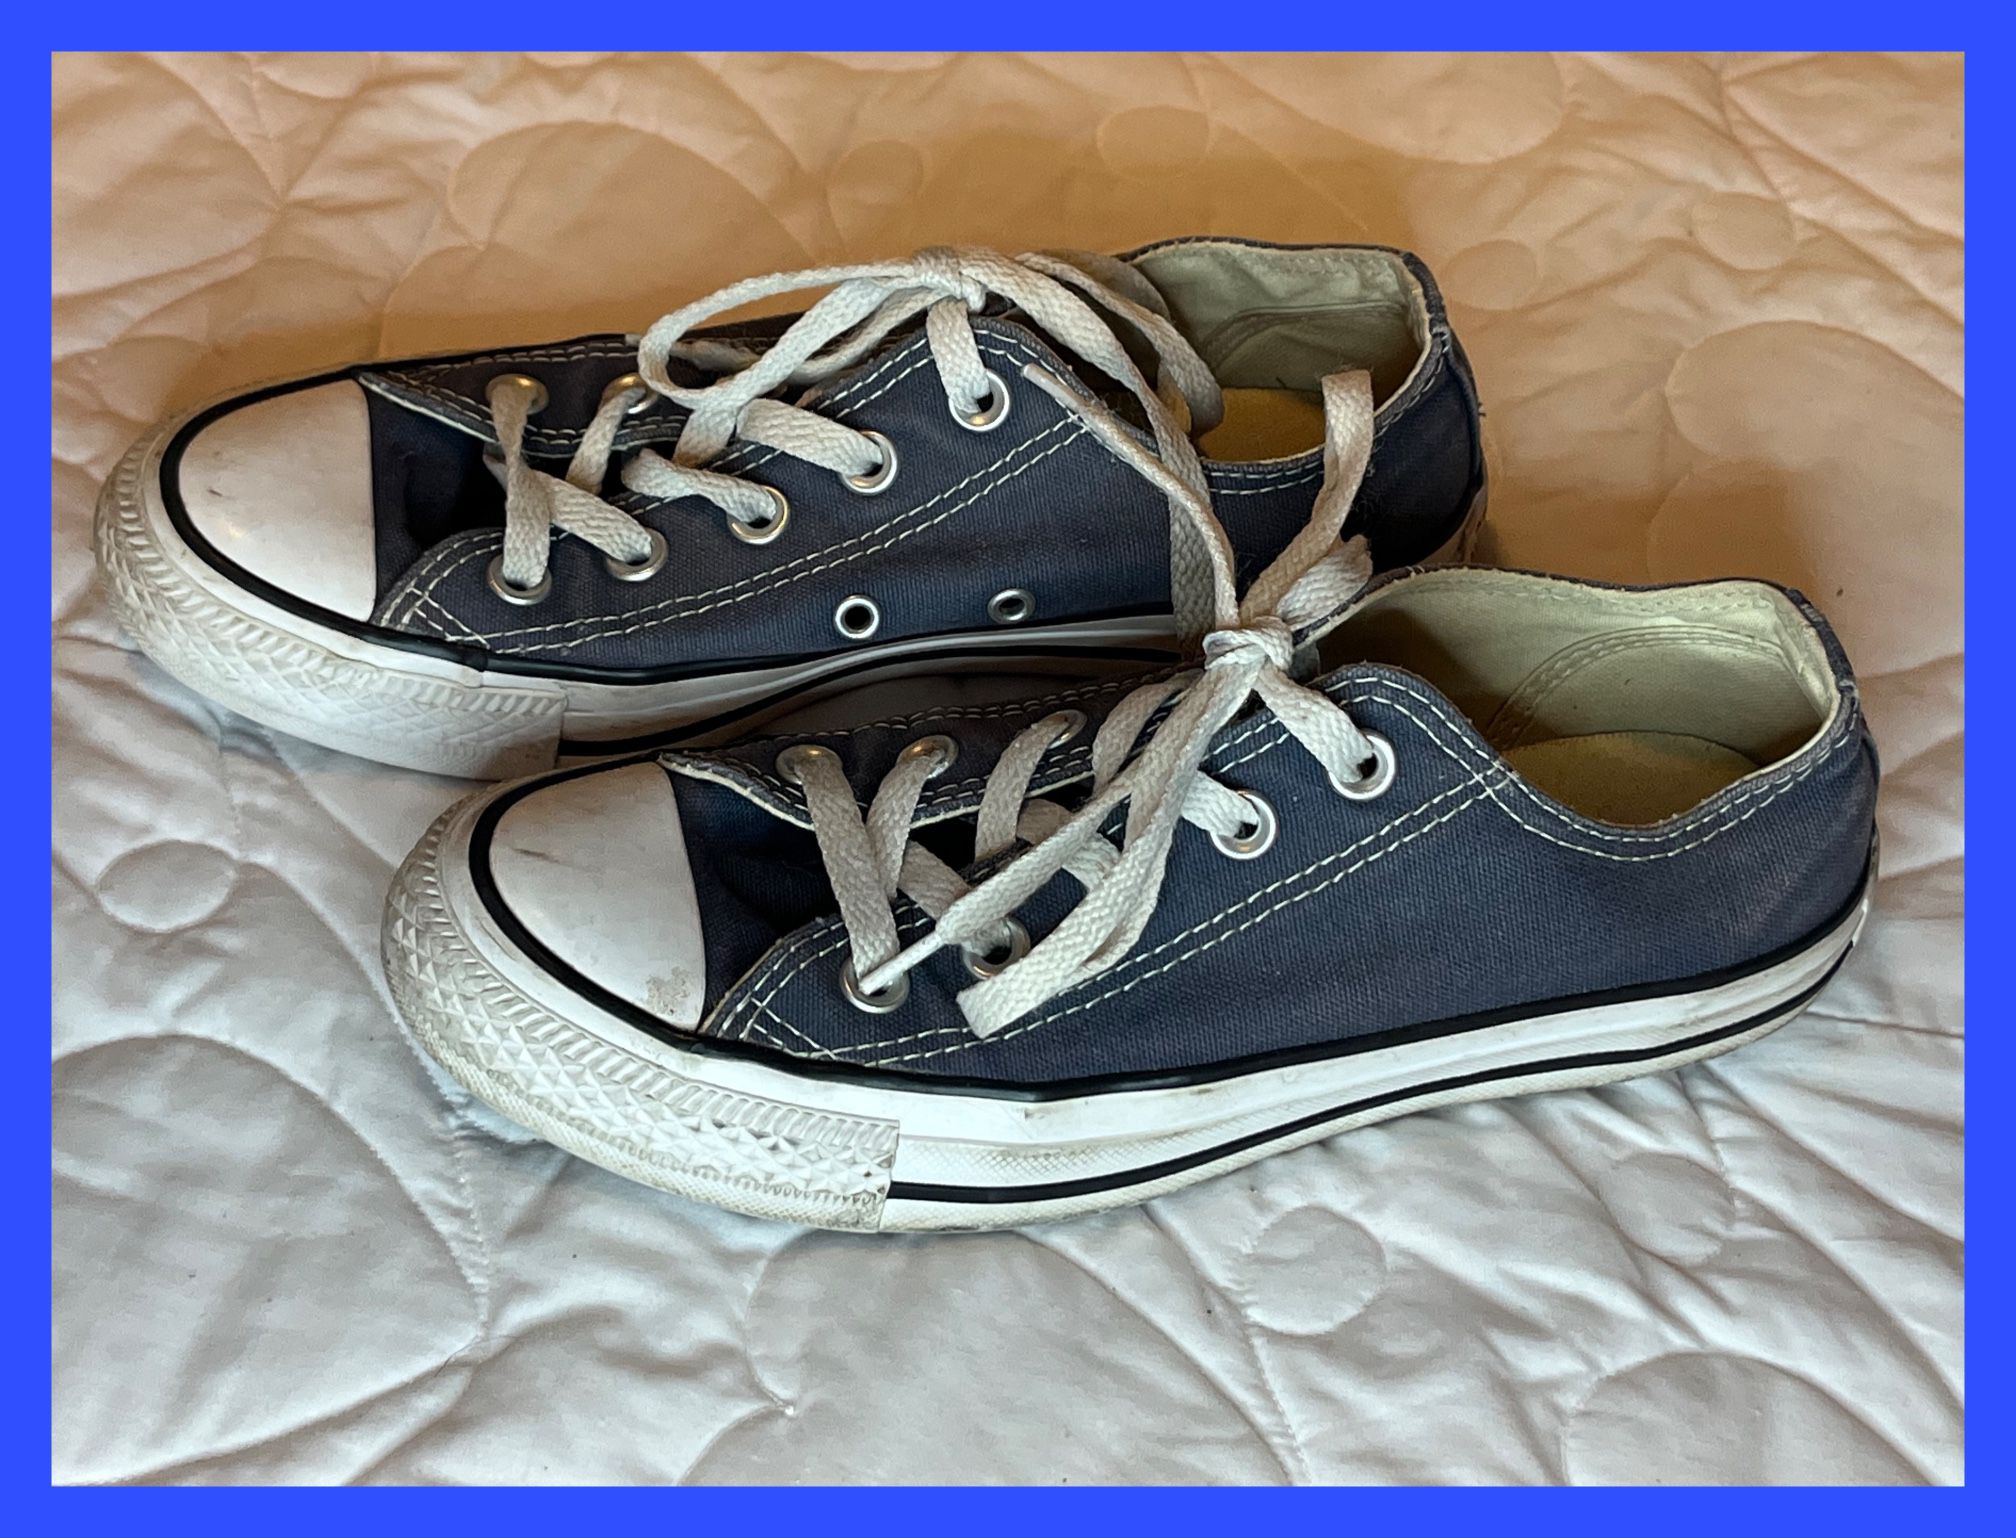 Converse All Star Low Top Sneakers Mens 4 Womens 6 Blue and White Canvas Shoes